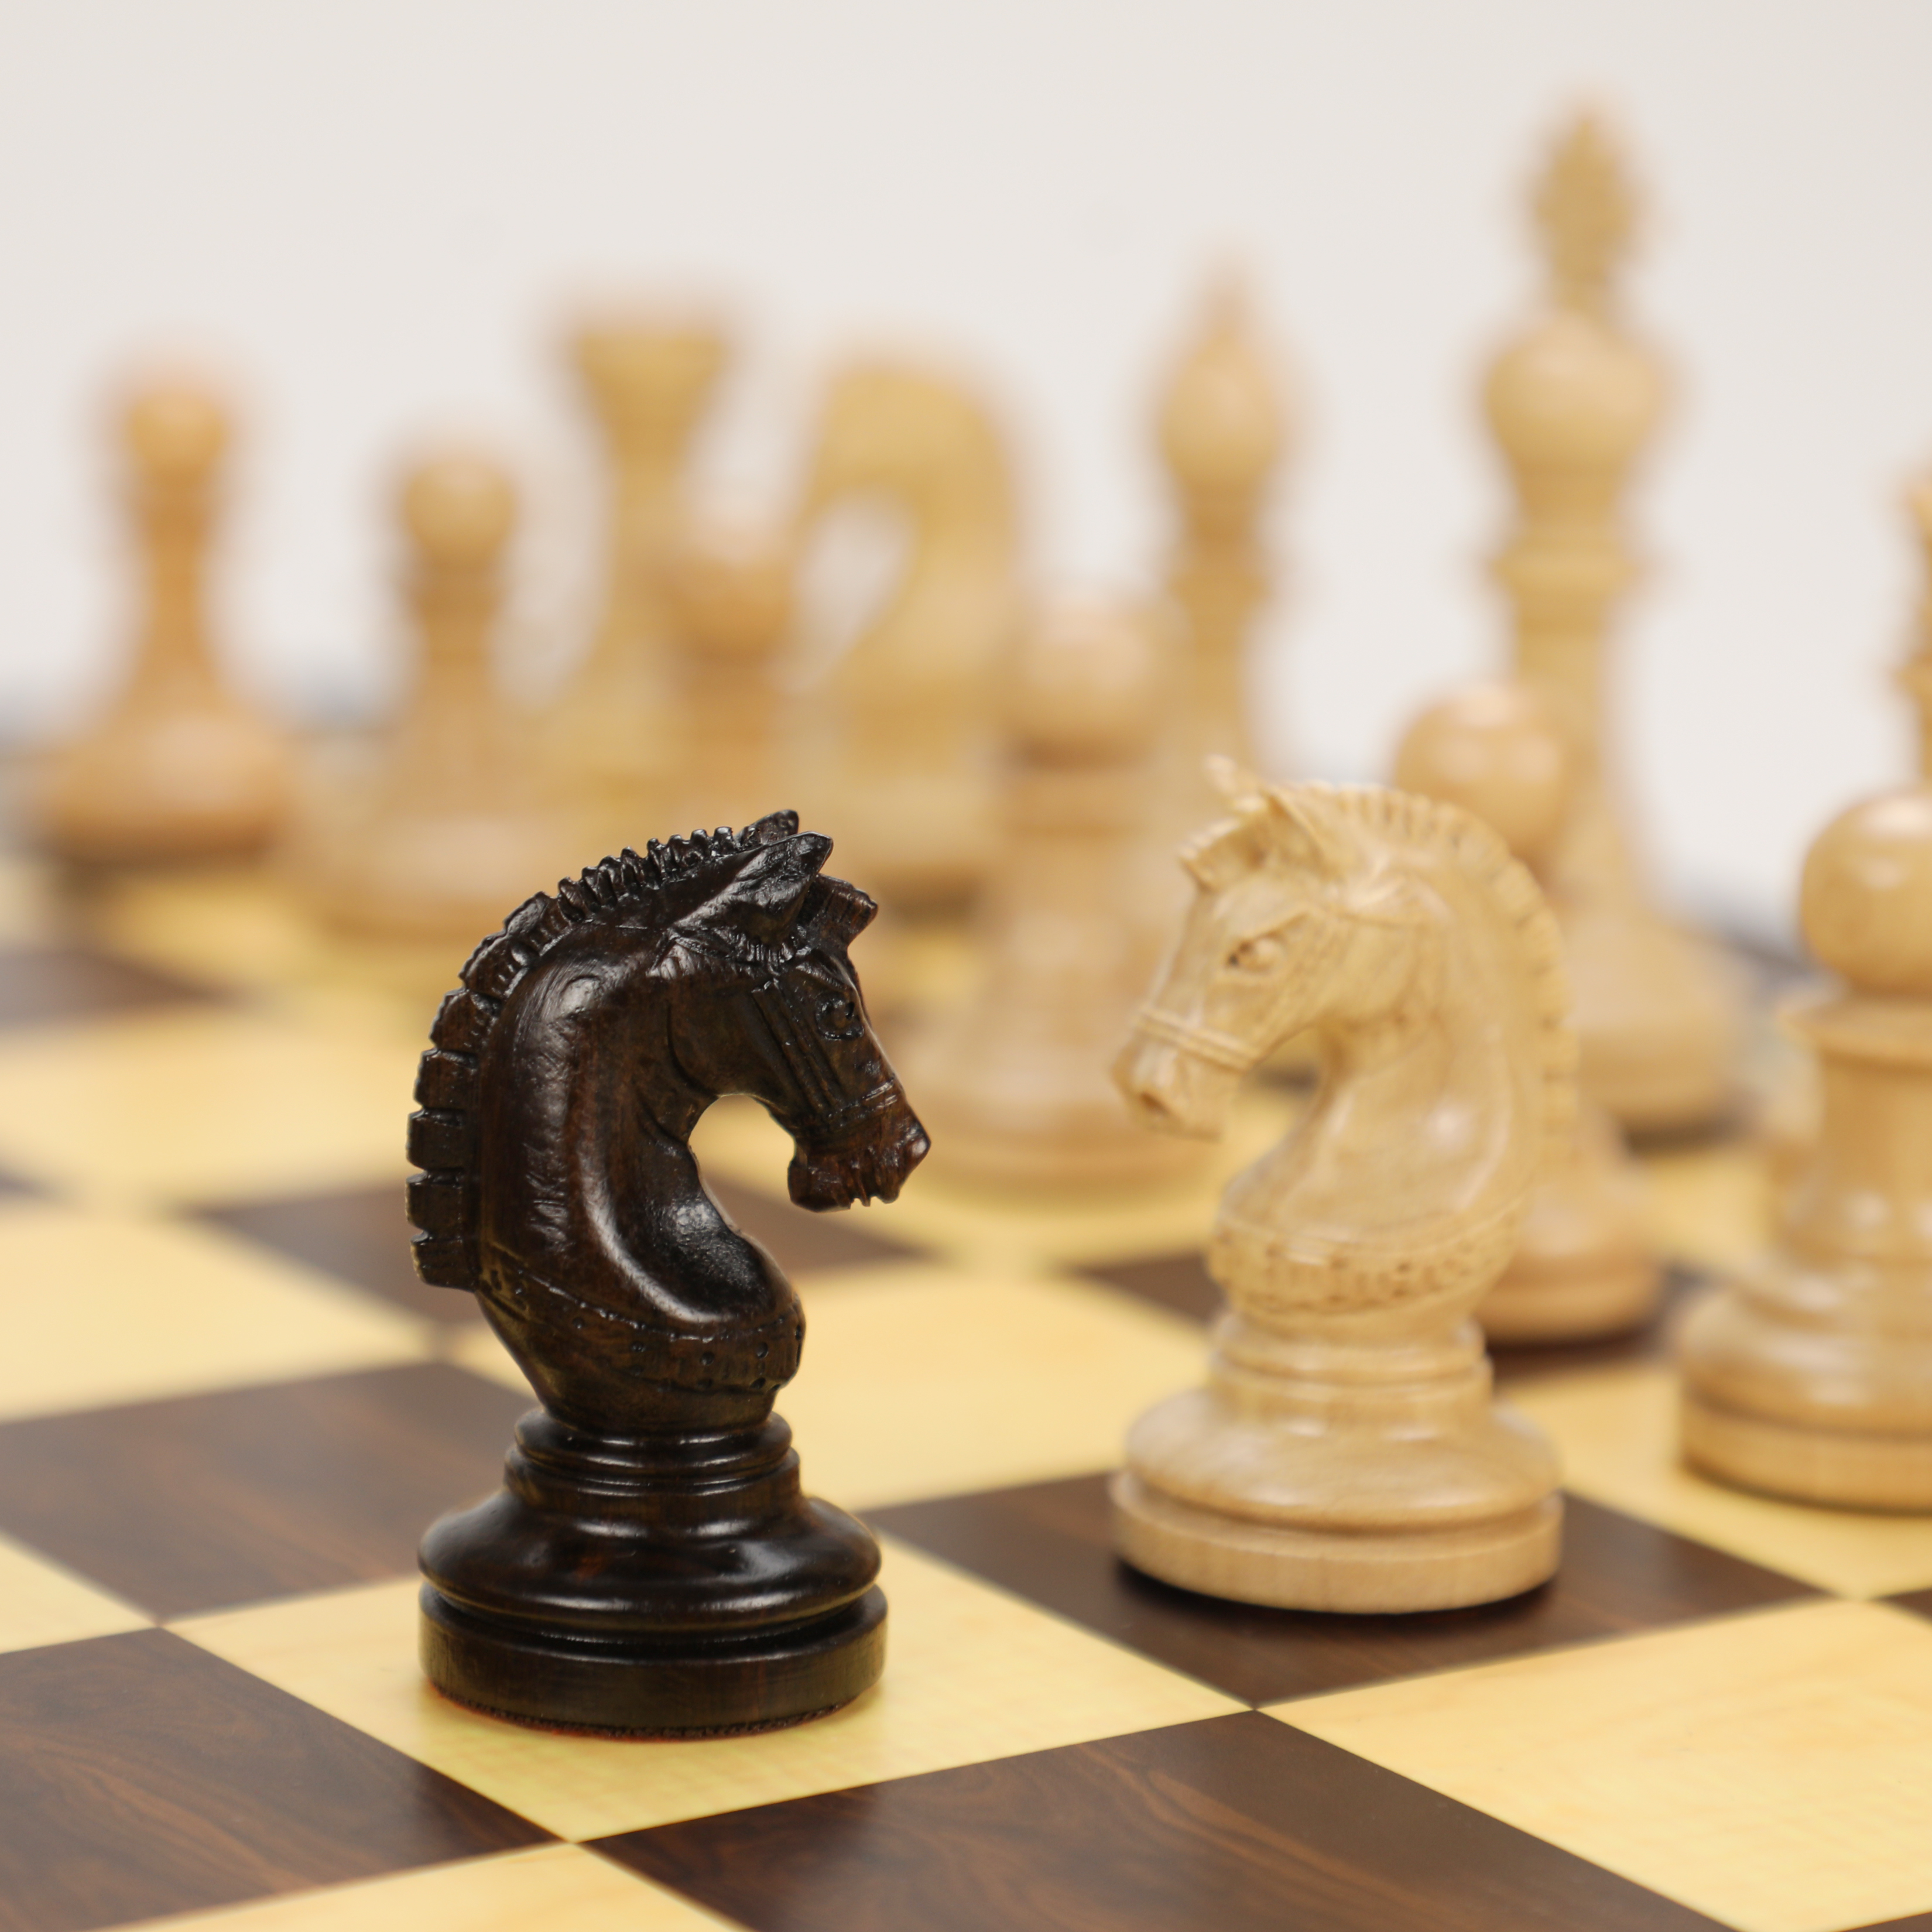 Luxury Ebony & Mapble with Wooden Chess Box and Flat Chess Board